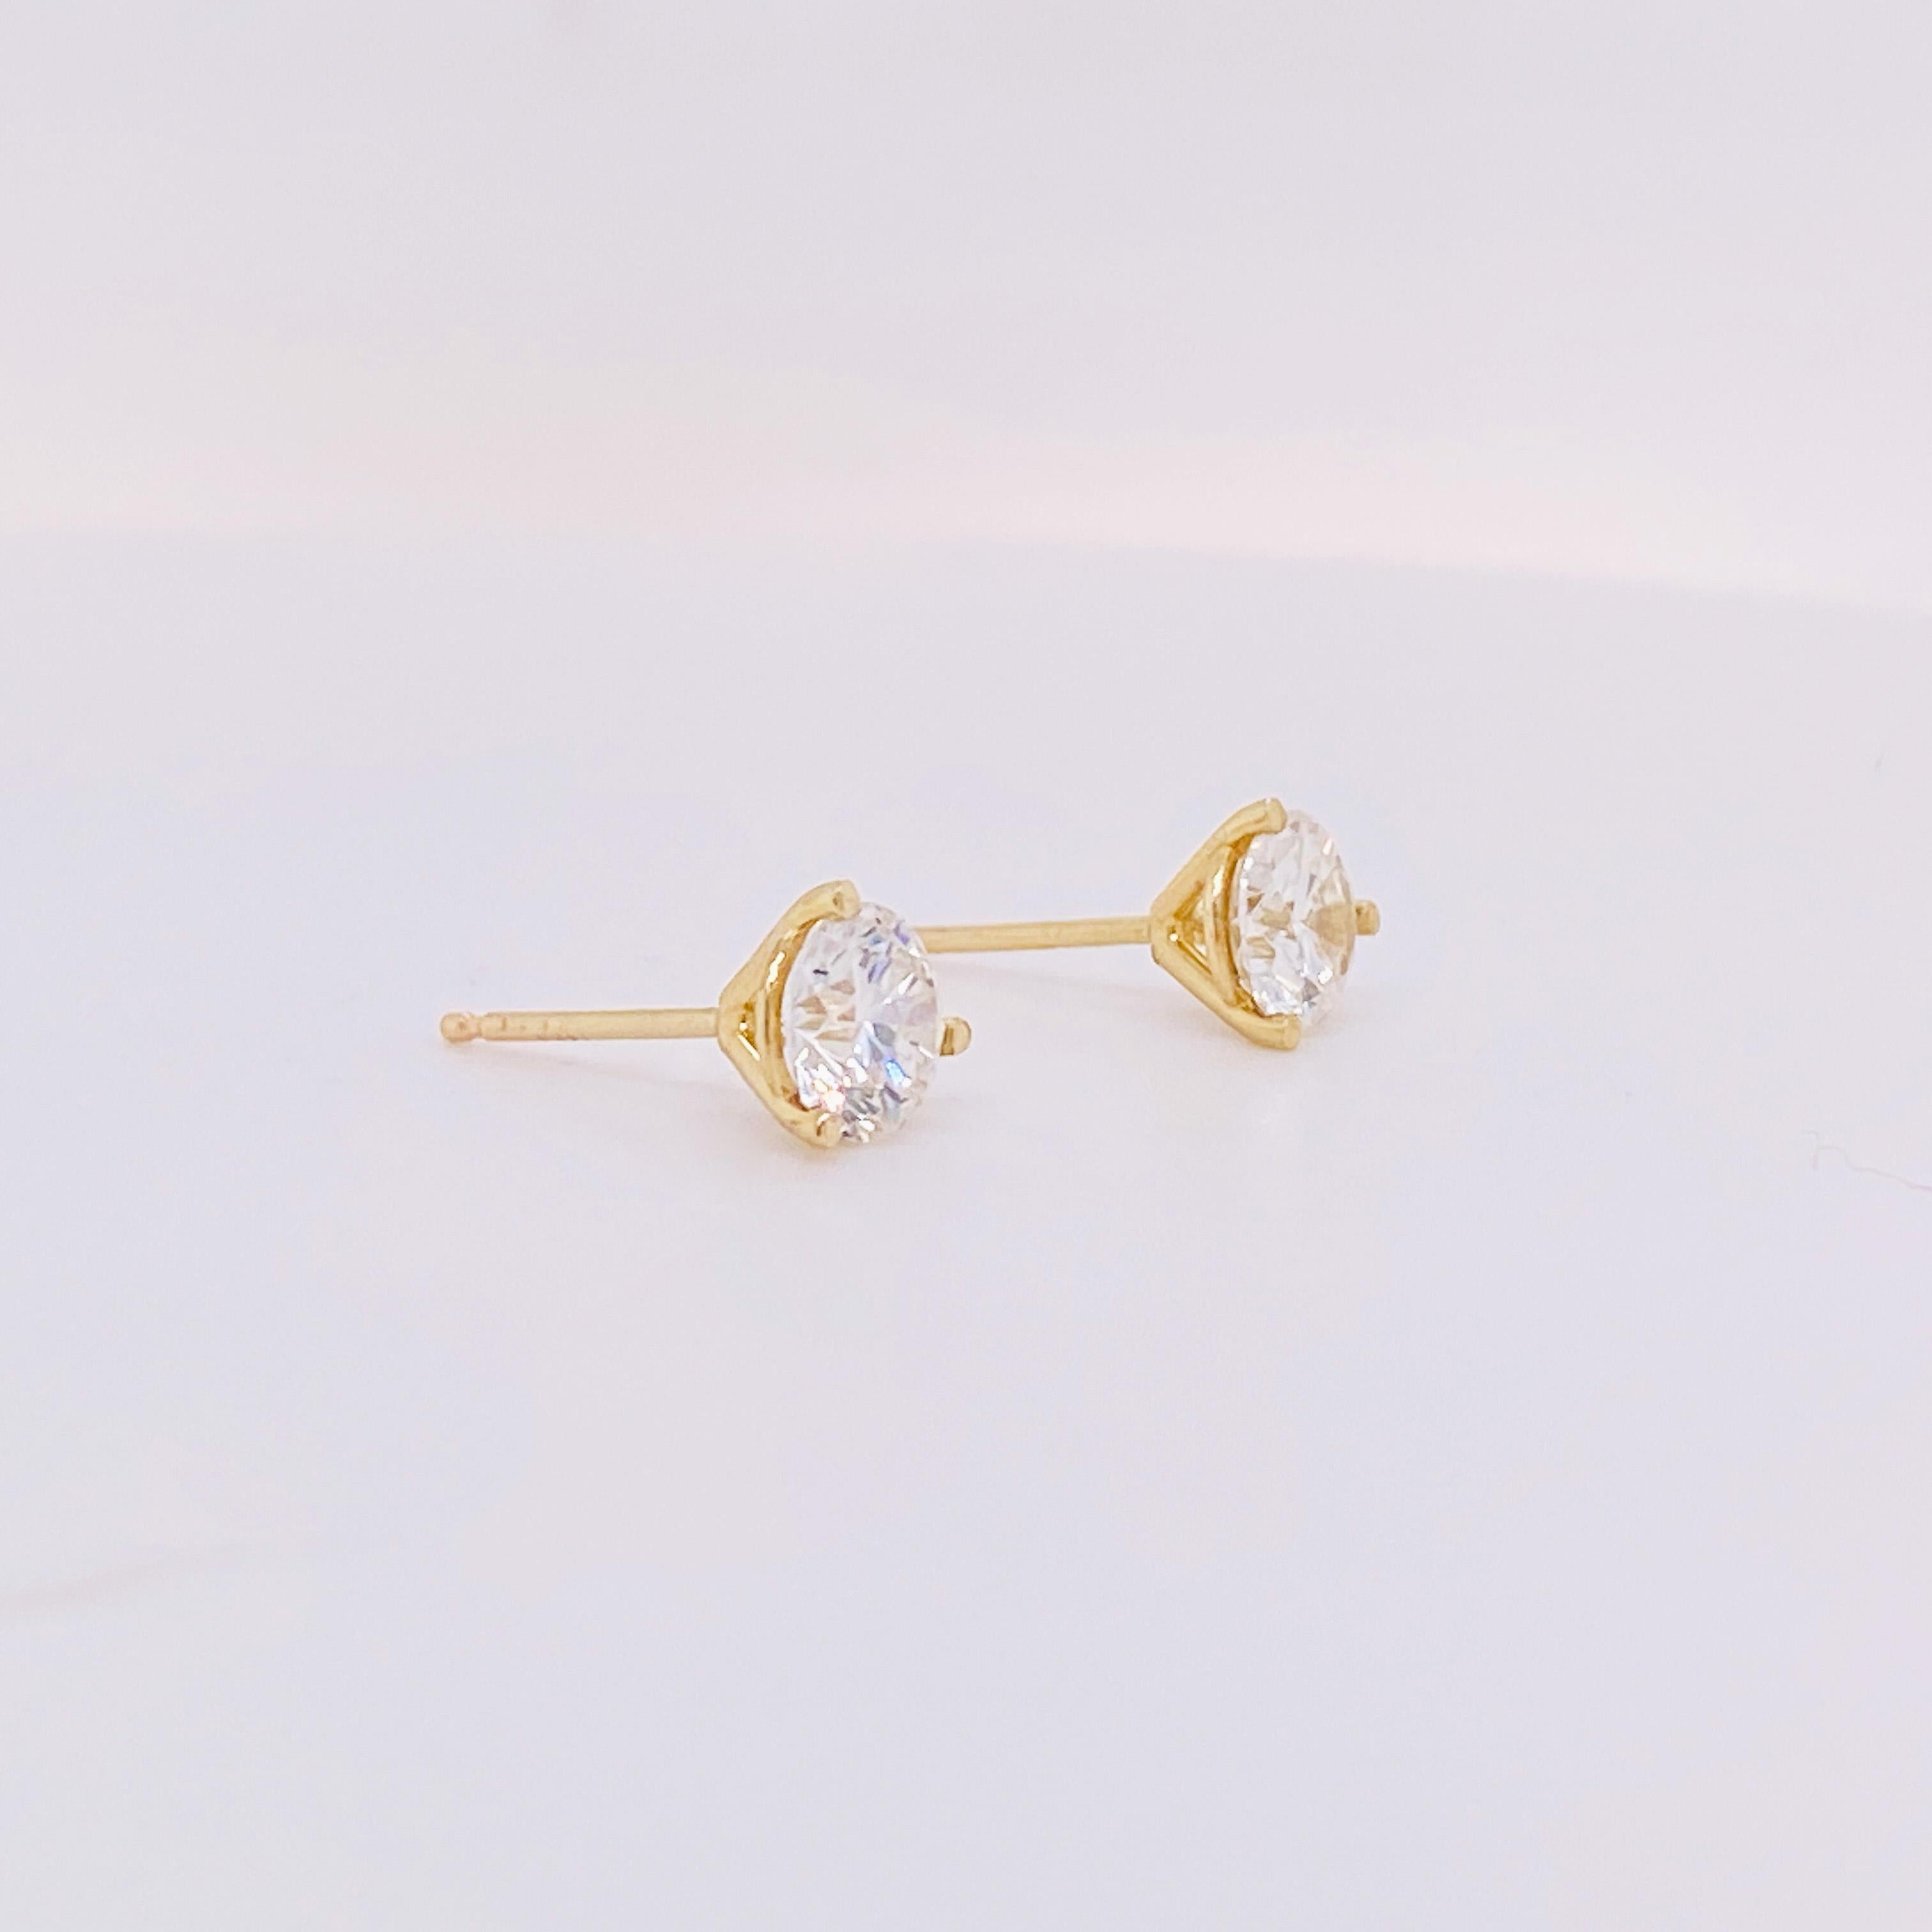 Modern GIA Diamond Martini Stud Earrings 1.40 Carats in 14k Yellow/White/Rose Gold LV For Sale